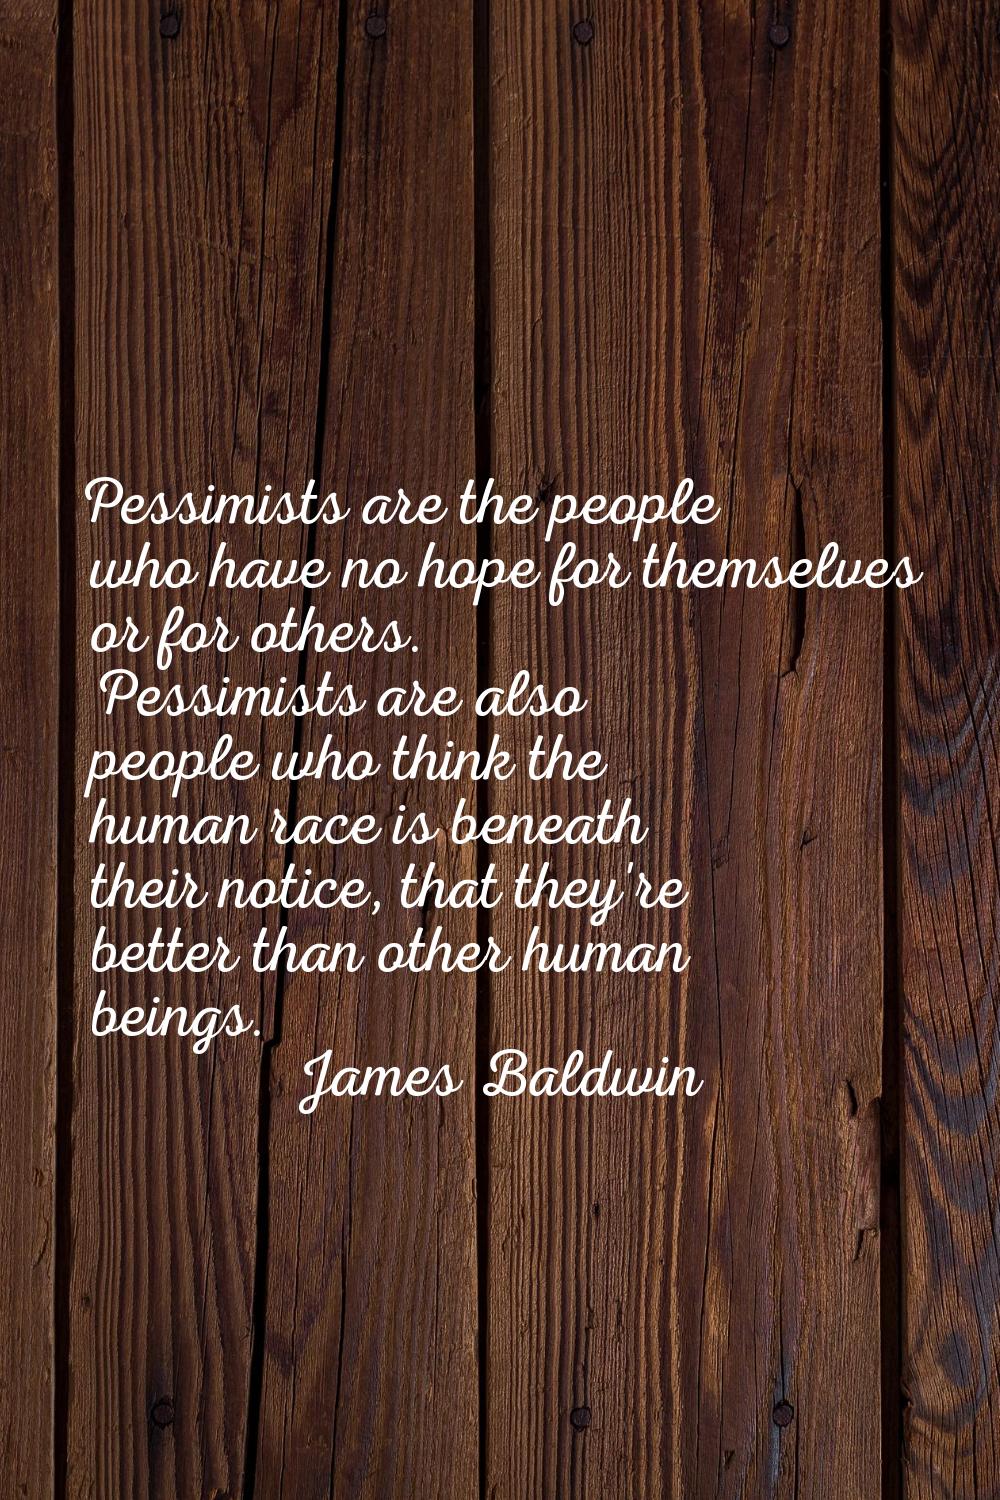 Pessimists are the people who have no hope for themselves or for others. Pessimists are also people